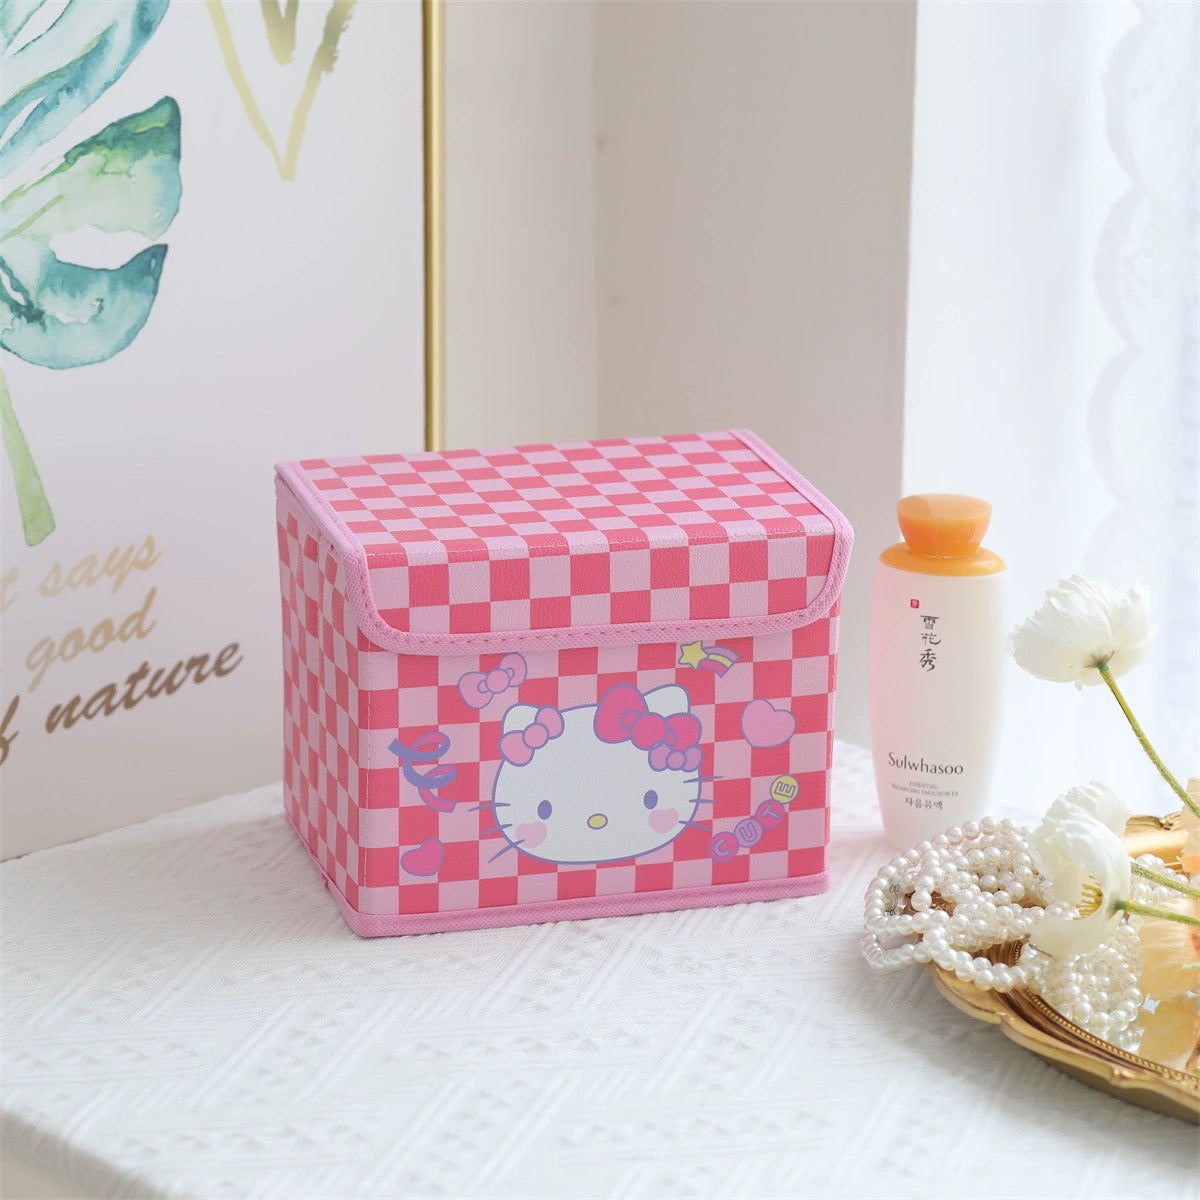 Sanrio Japanese Checkered Storage Box with Cover | Hello Kitty My Melody Kuromi Little Twin Stars Cinnamoroll Pompompurin Pochacco - Bedroom Girl Gift